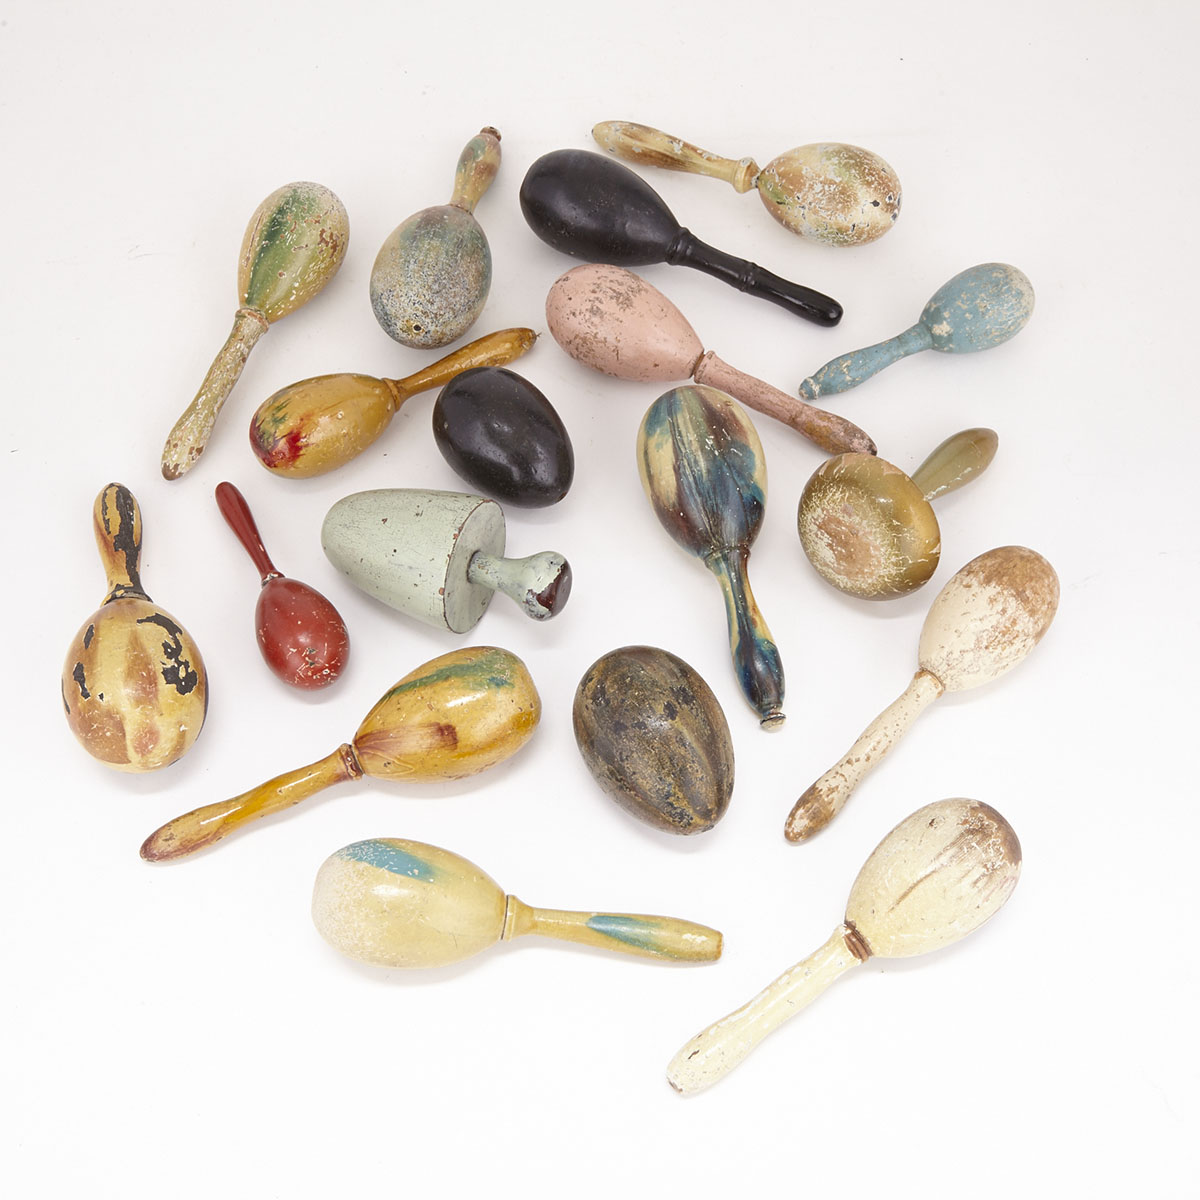 Collection of 18 Turned and Painted Wood Darning Eggs, 19th/early 20th century